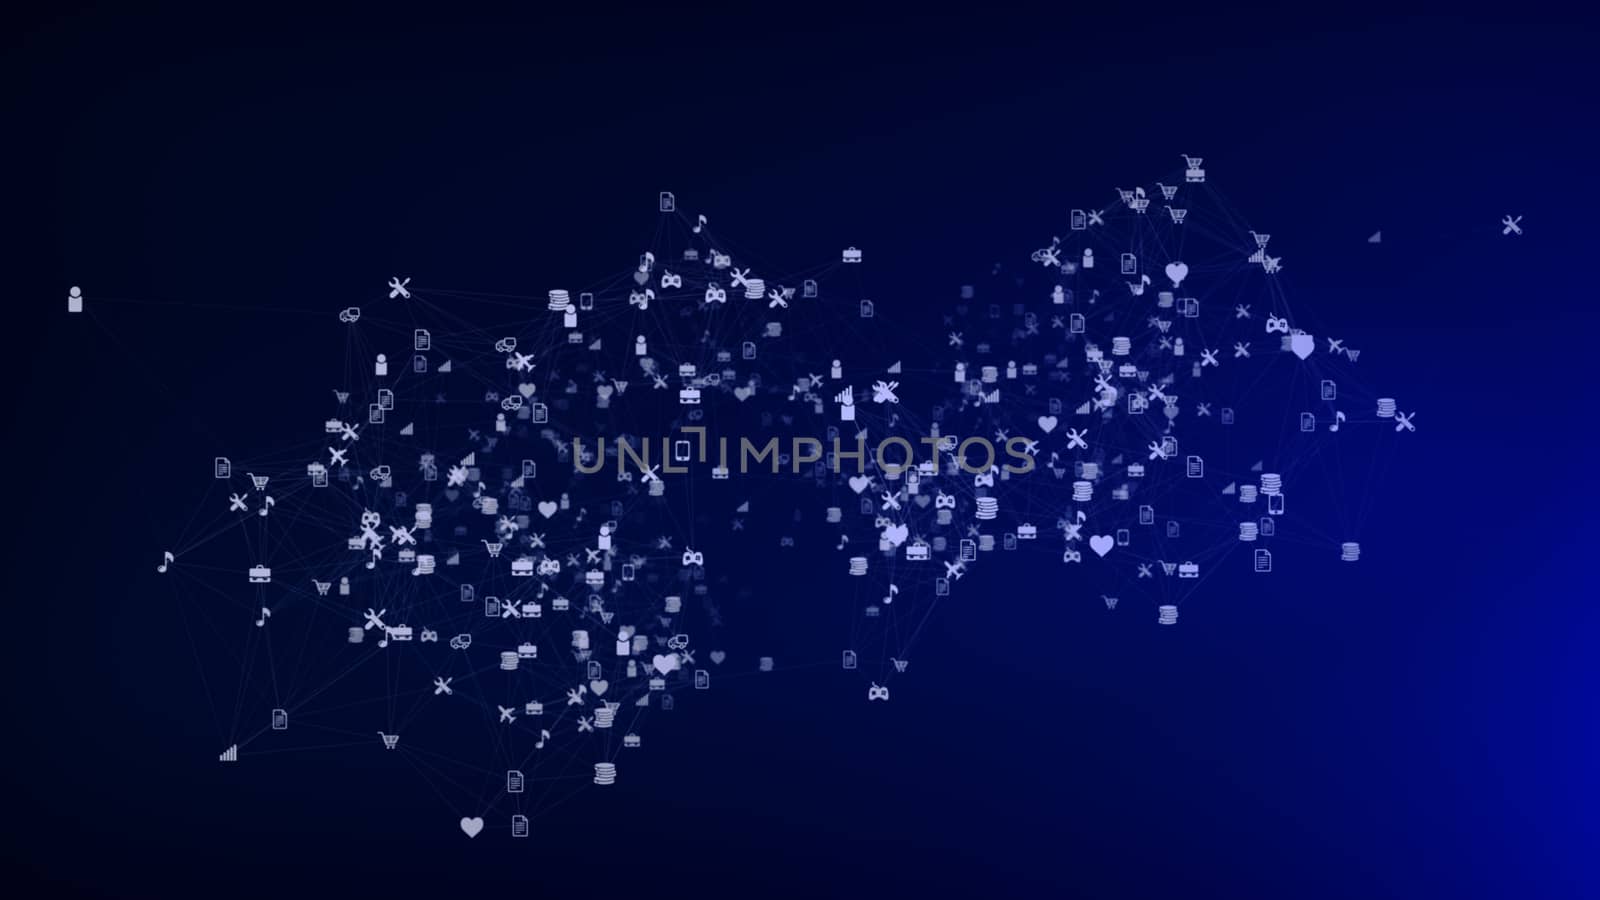 Childish 3d illustration of a plexus of social network symbols and signs including airplanes, hearts, baskets and portfolios in the dark blue background.